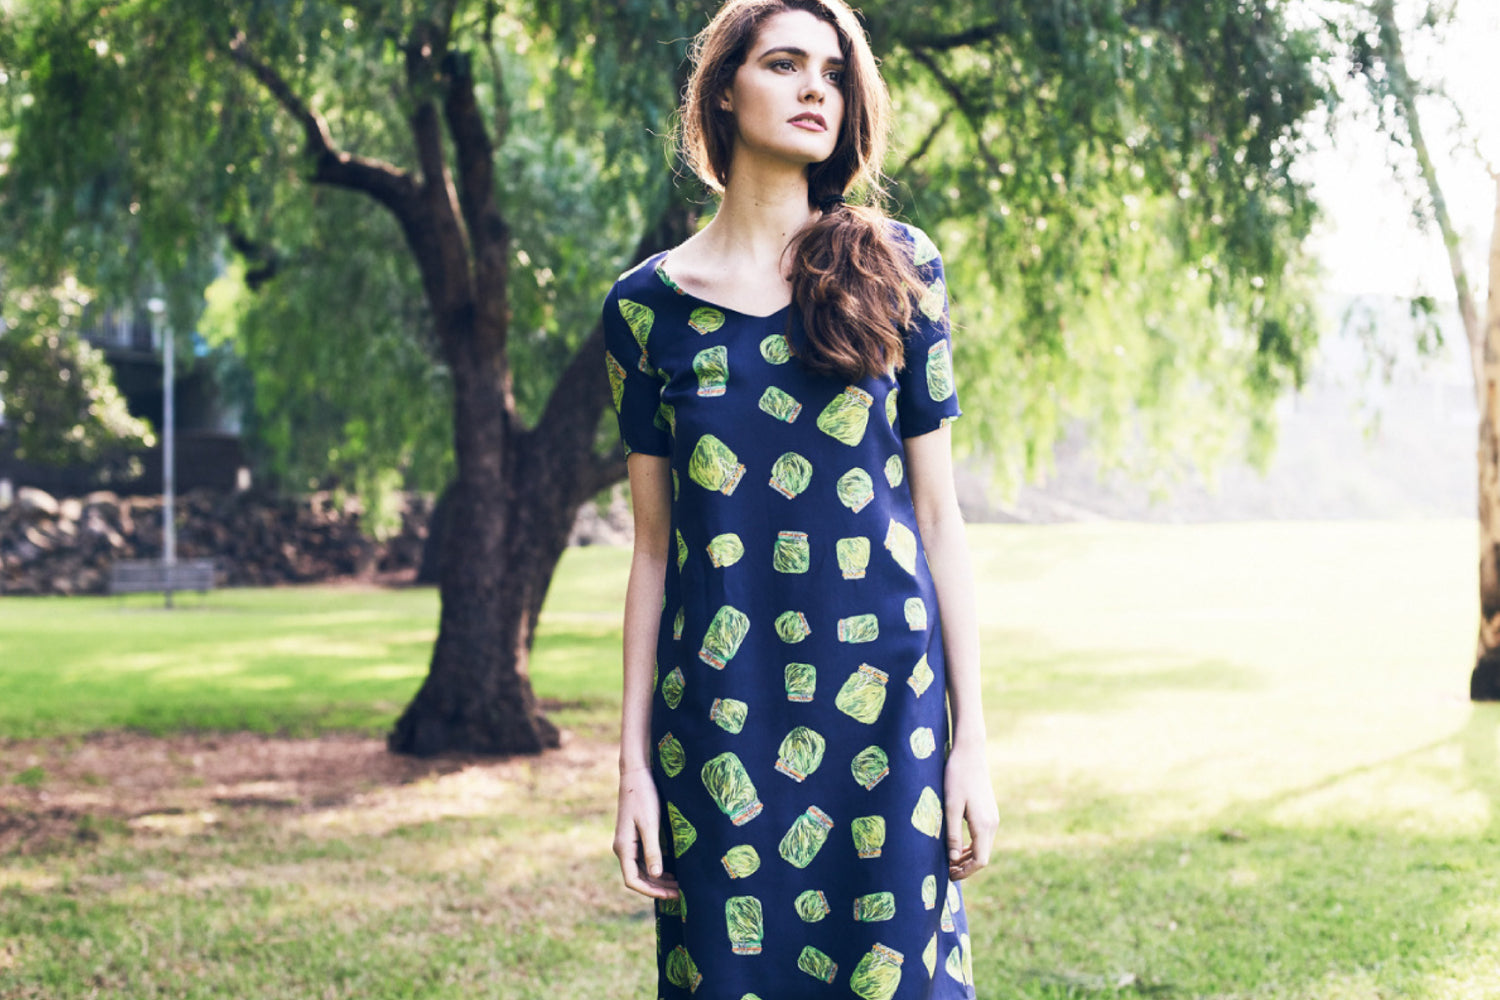 DEVOI divulges the secrets behind its bright prints and bold designs The Fashion Advocate